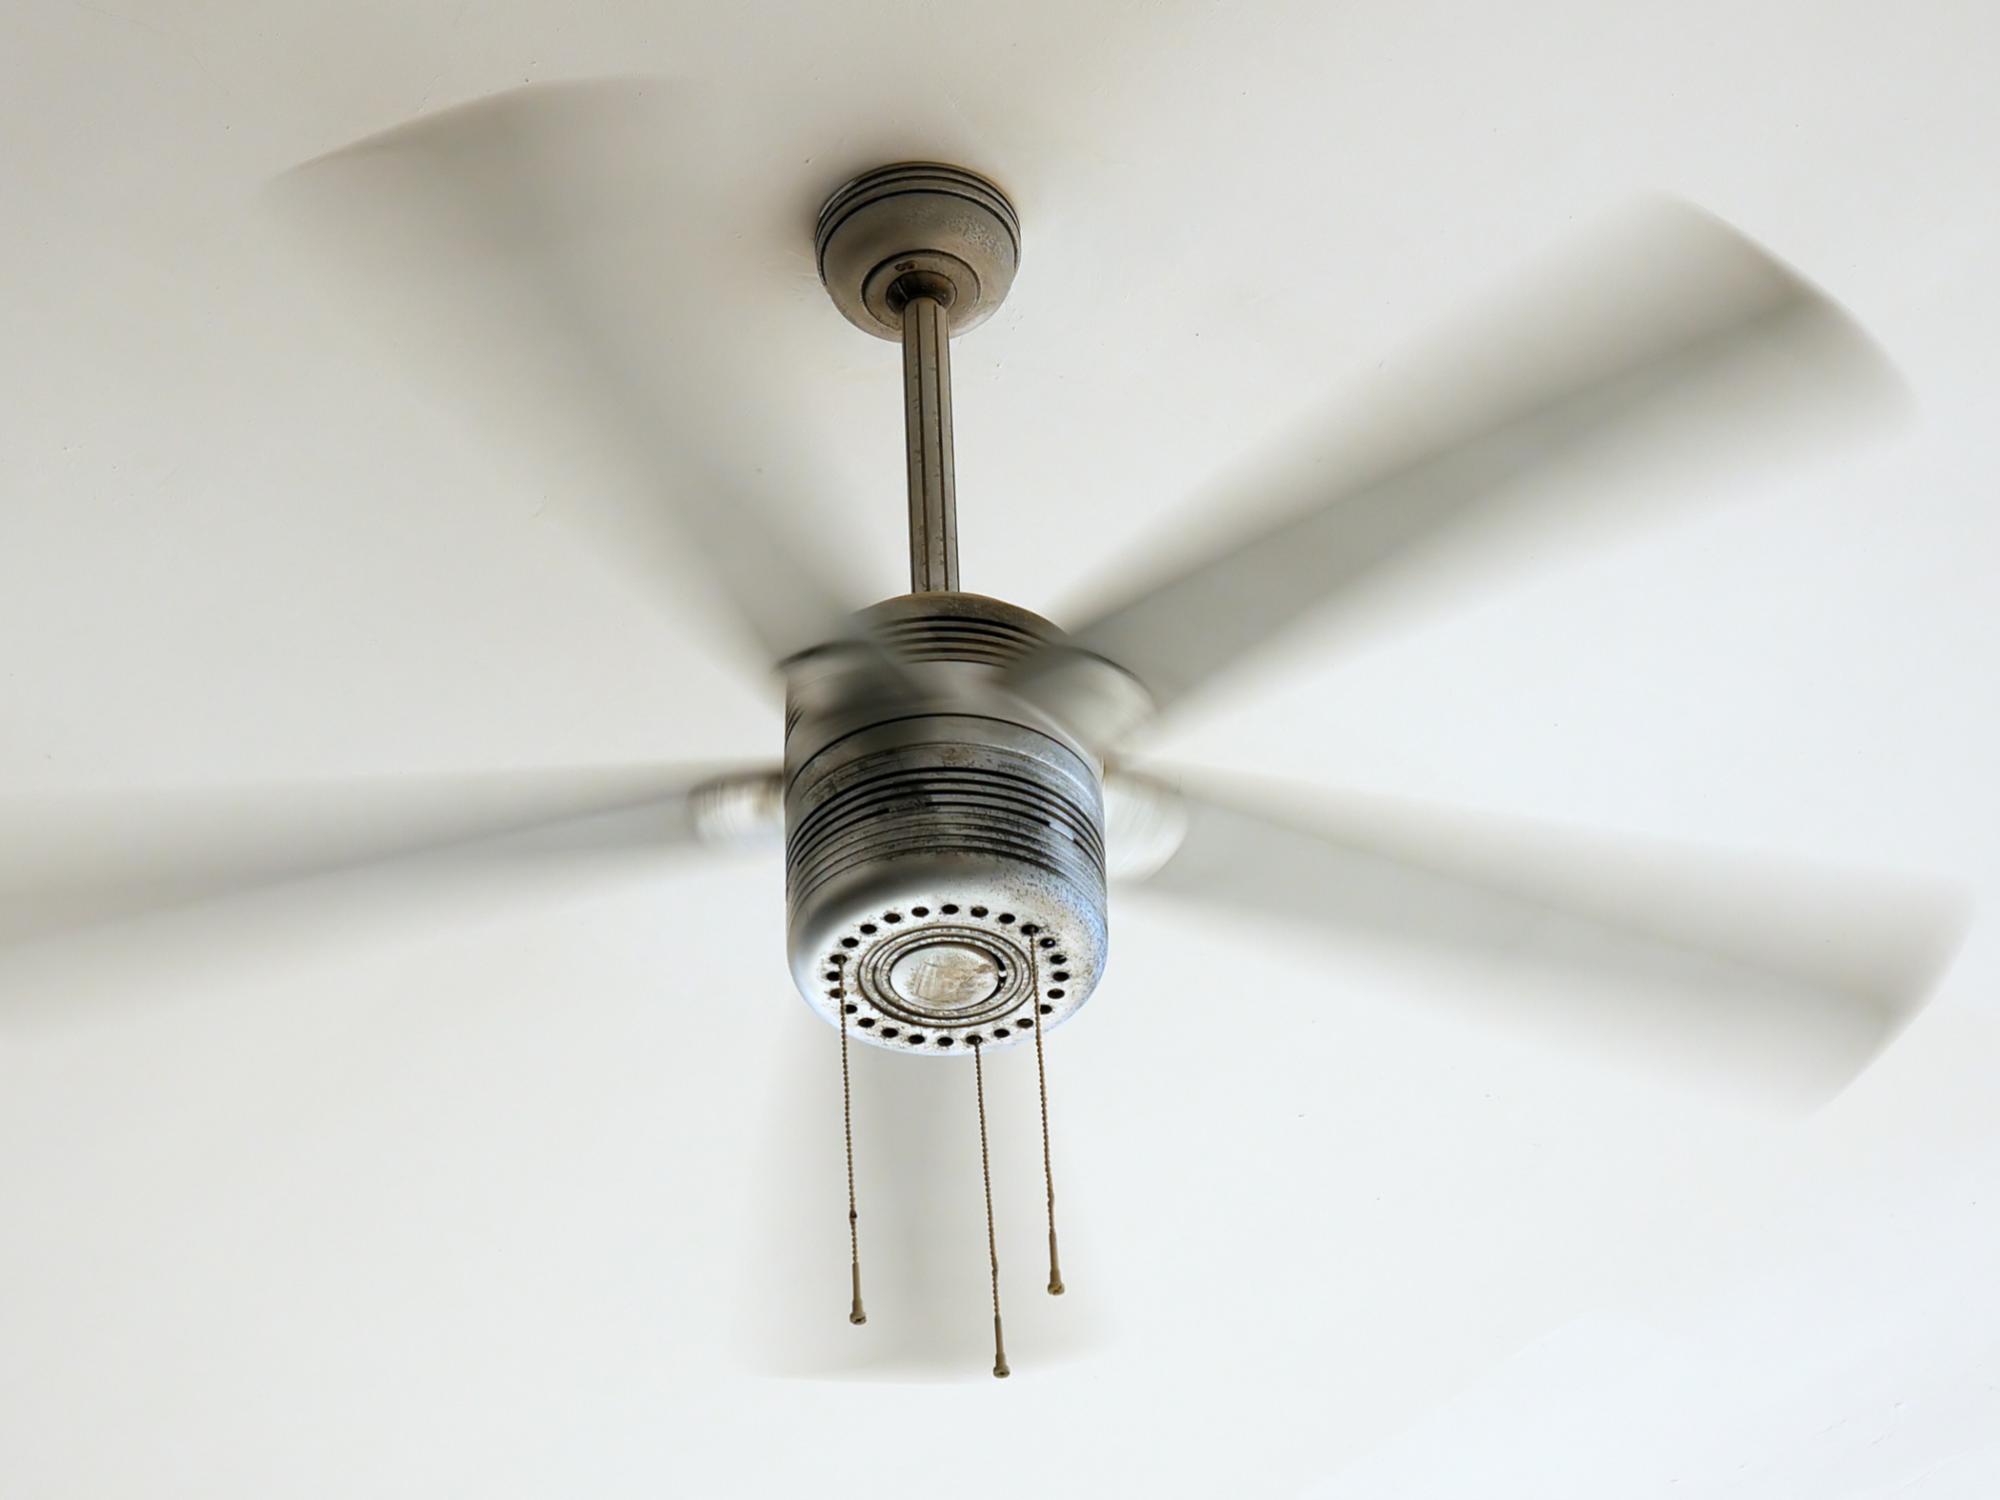 Ceiling Fans Put Another Spin On